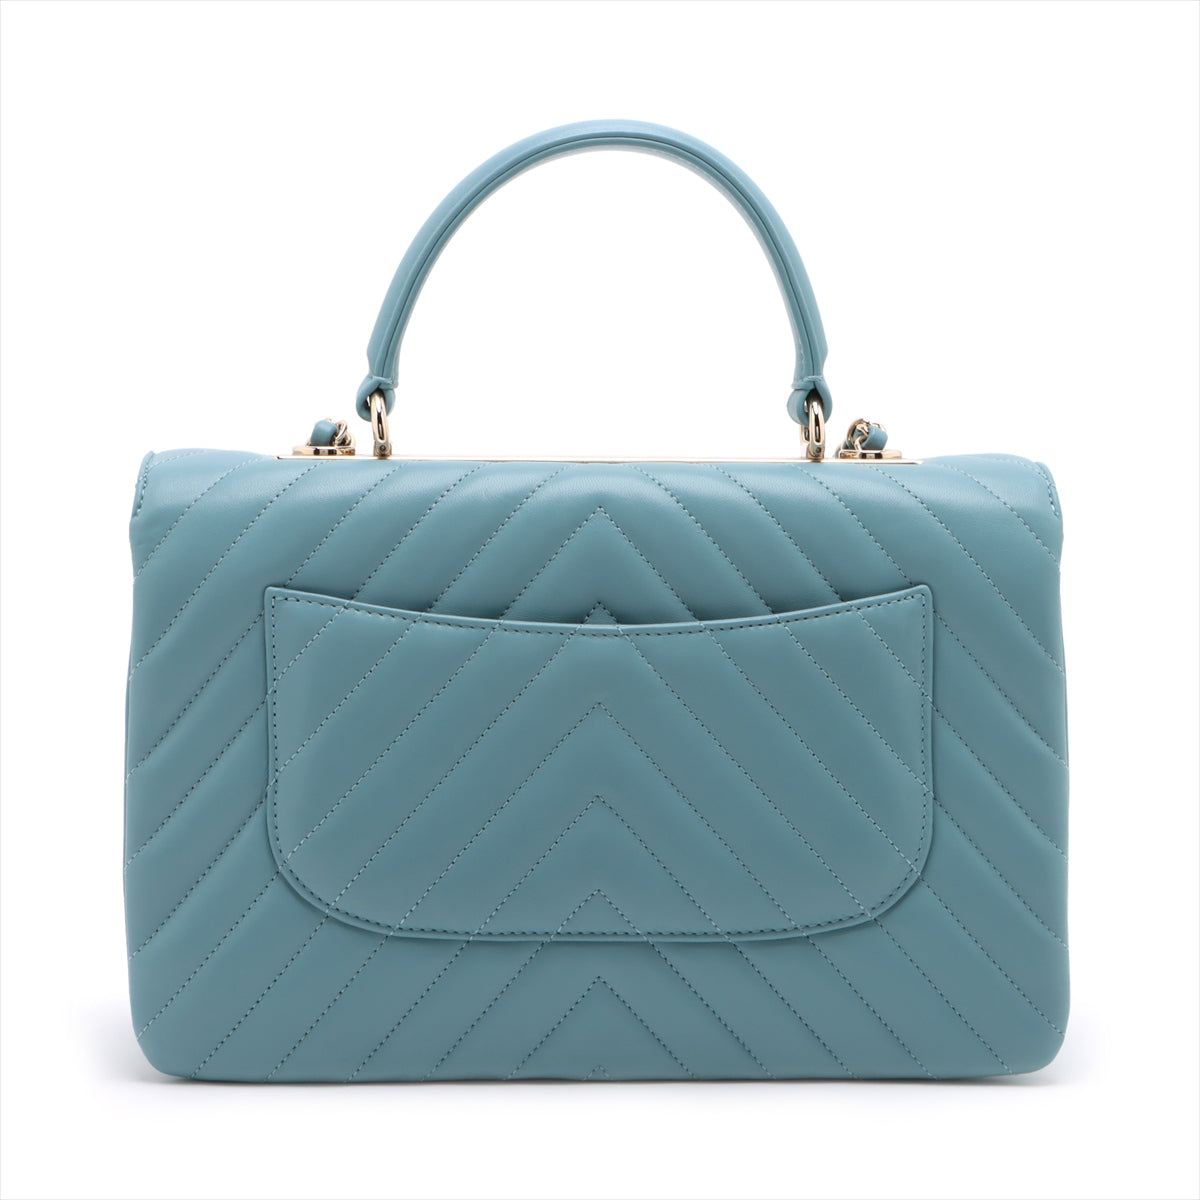 CHANEL Chevron Top Handle Bag in Light Blue 25th Series